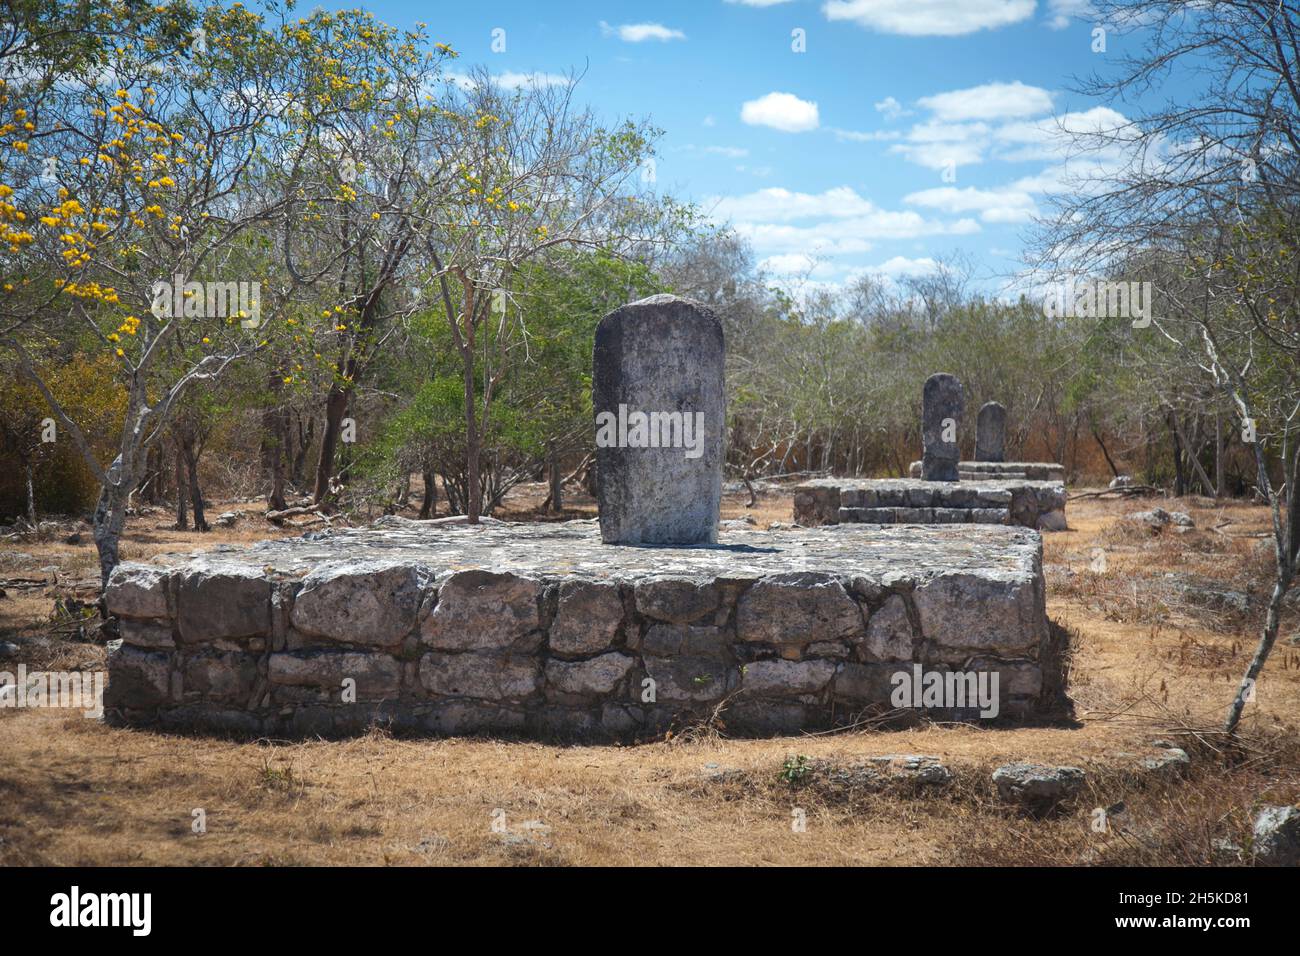 Stelae plaza at the Mayan archaeological site of Dzibilchaltun; Merida, Yucatan, Mexico Stock Photo